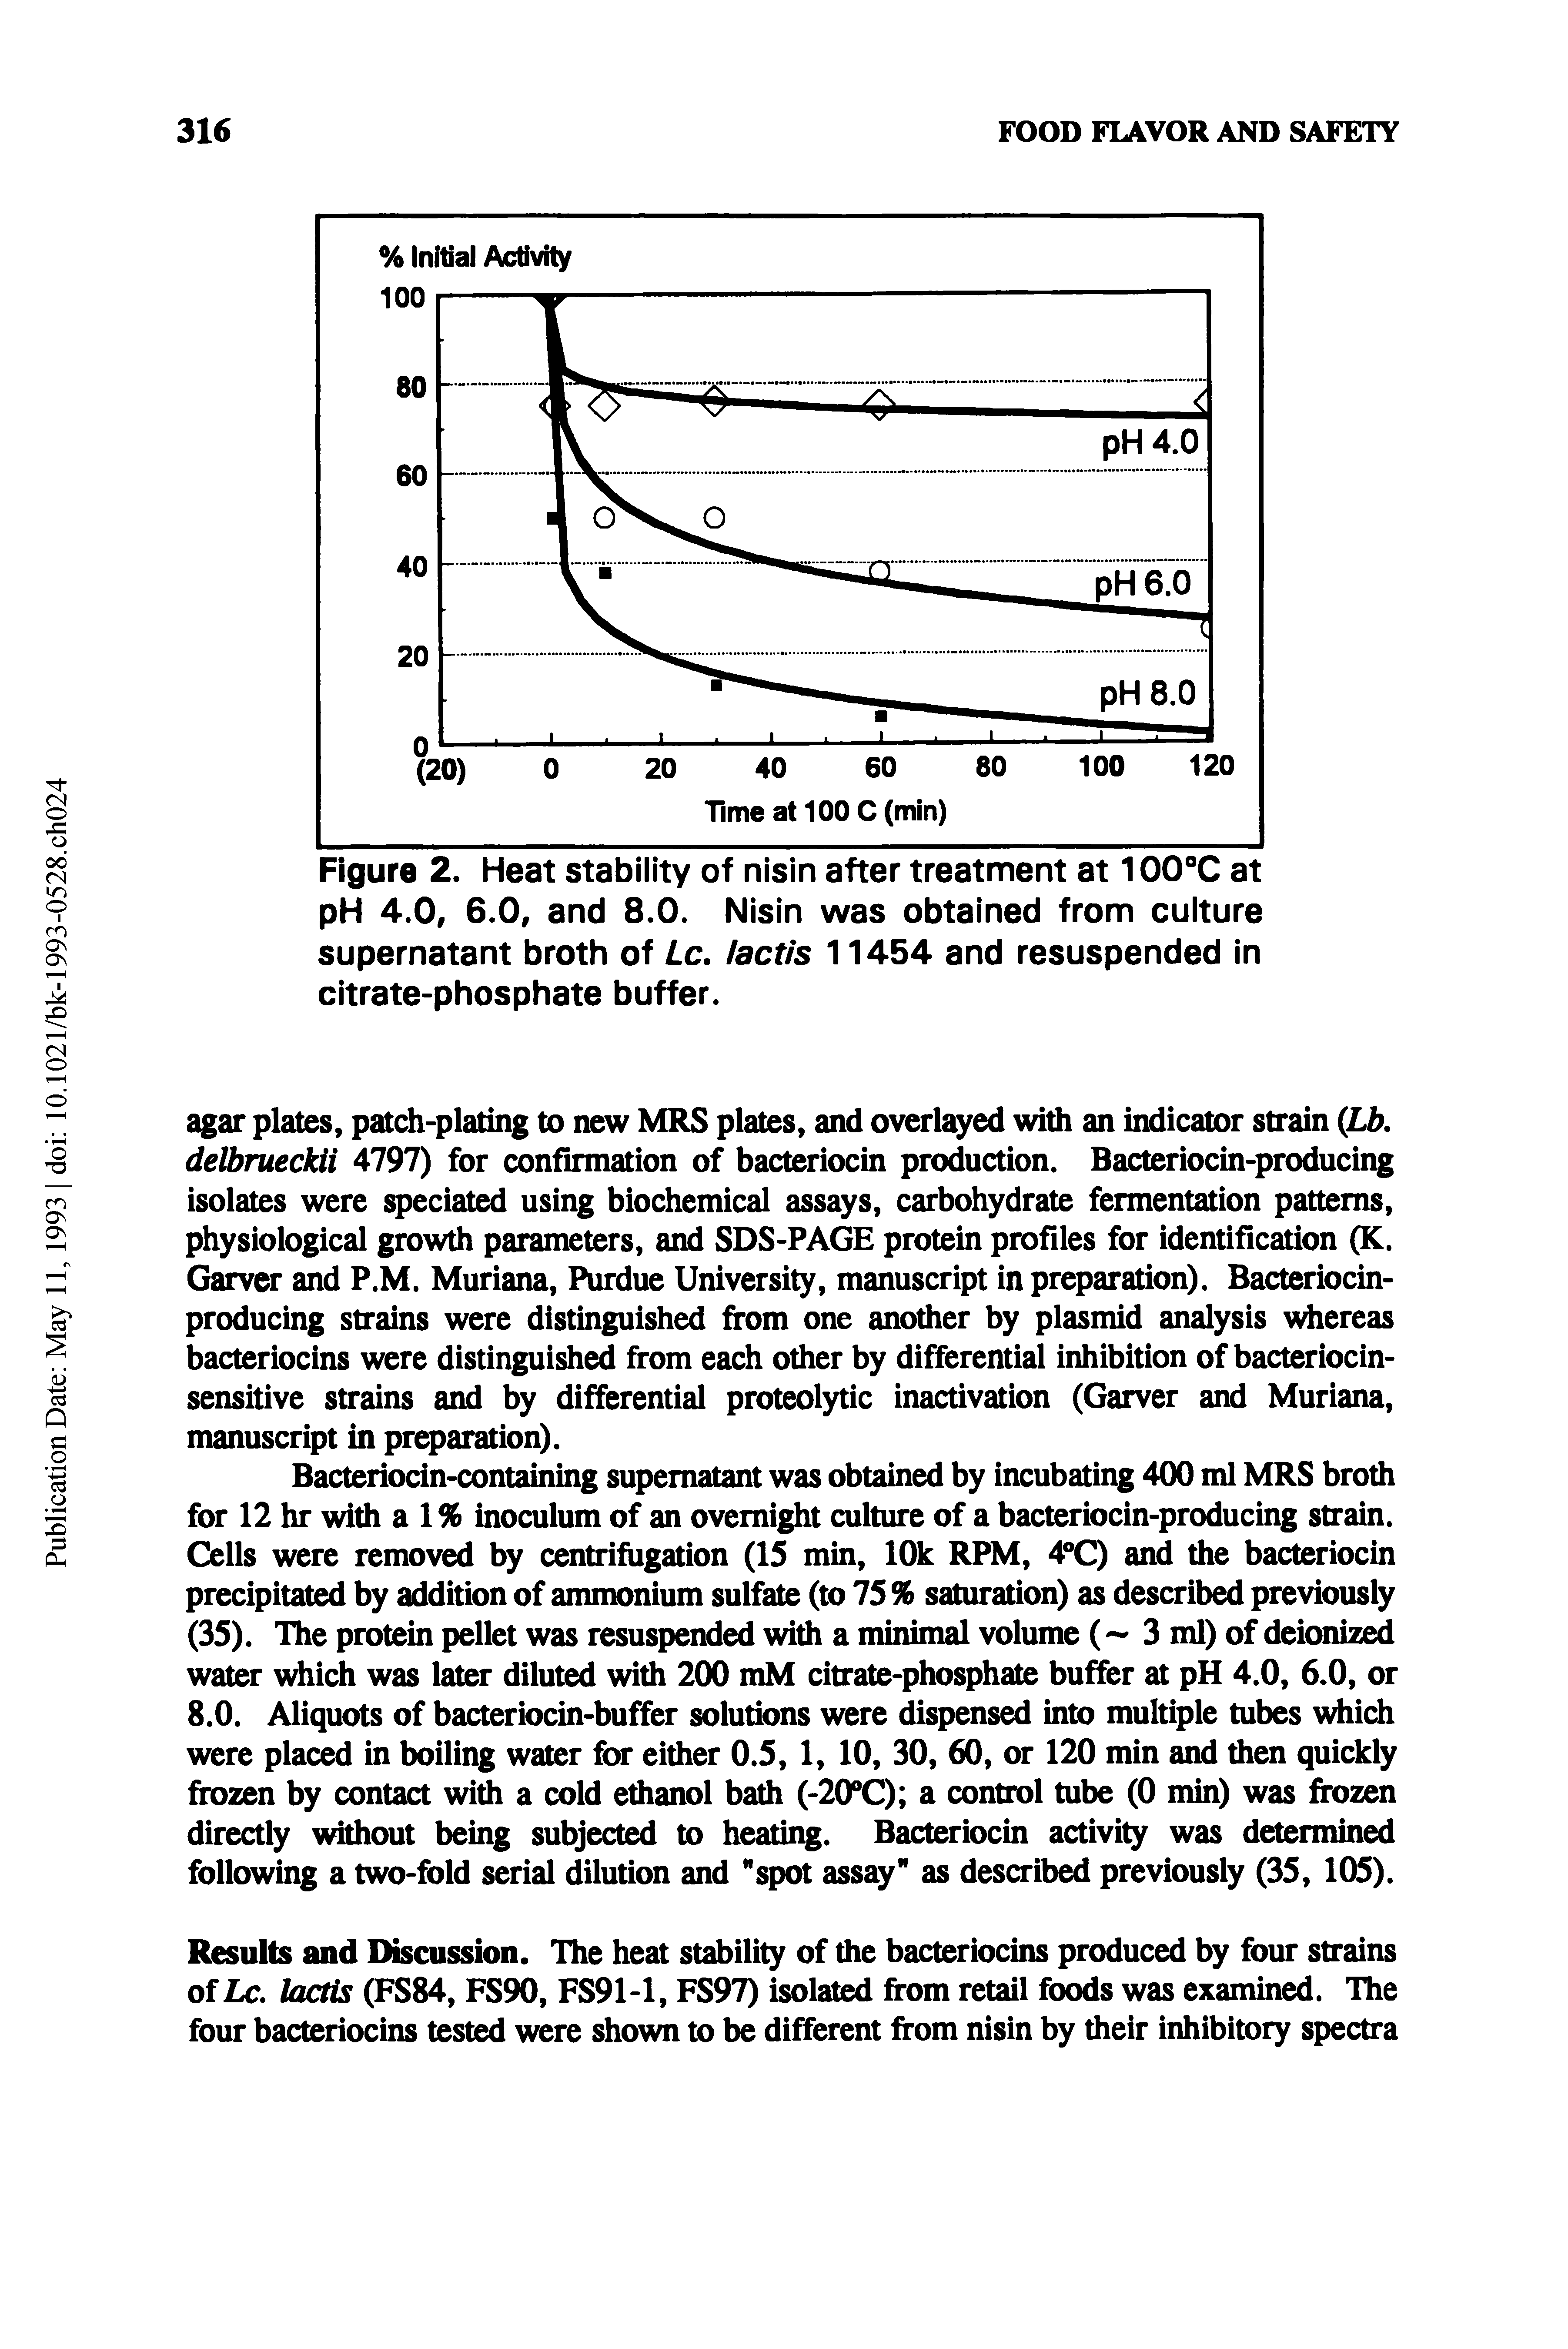 Figure 2. Heat stability of nisin after treatment at 100°C at pH 4.0, 6.0, and 8.0. Nisin was obtained from culture supernatant broth of Lc. lactis 11454 and resuspended in citrate-phosphate buffer.